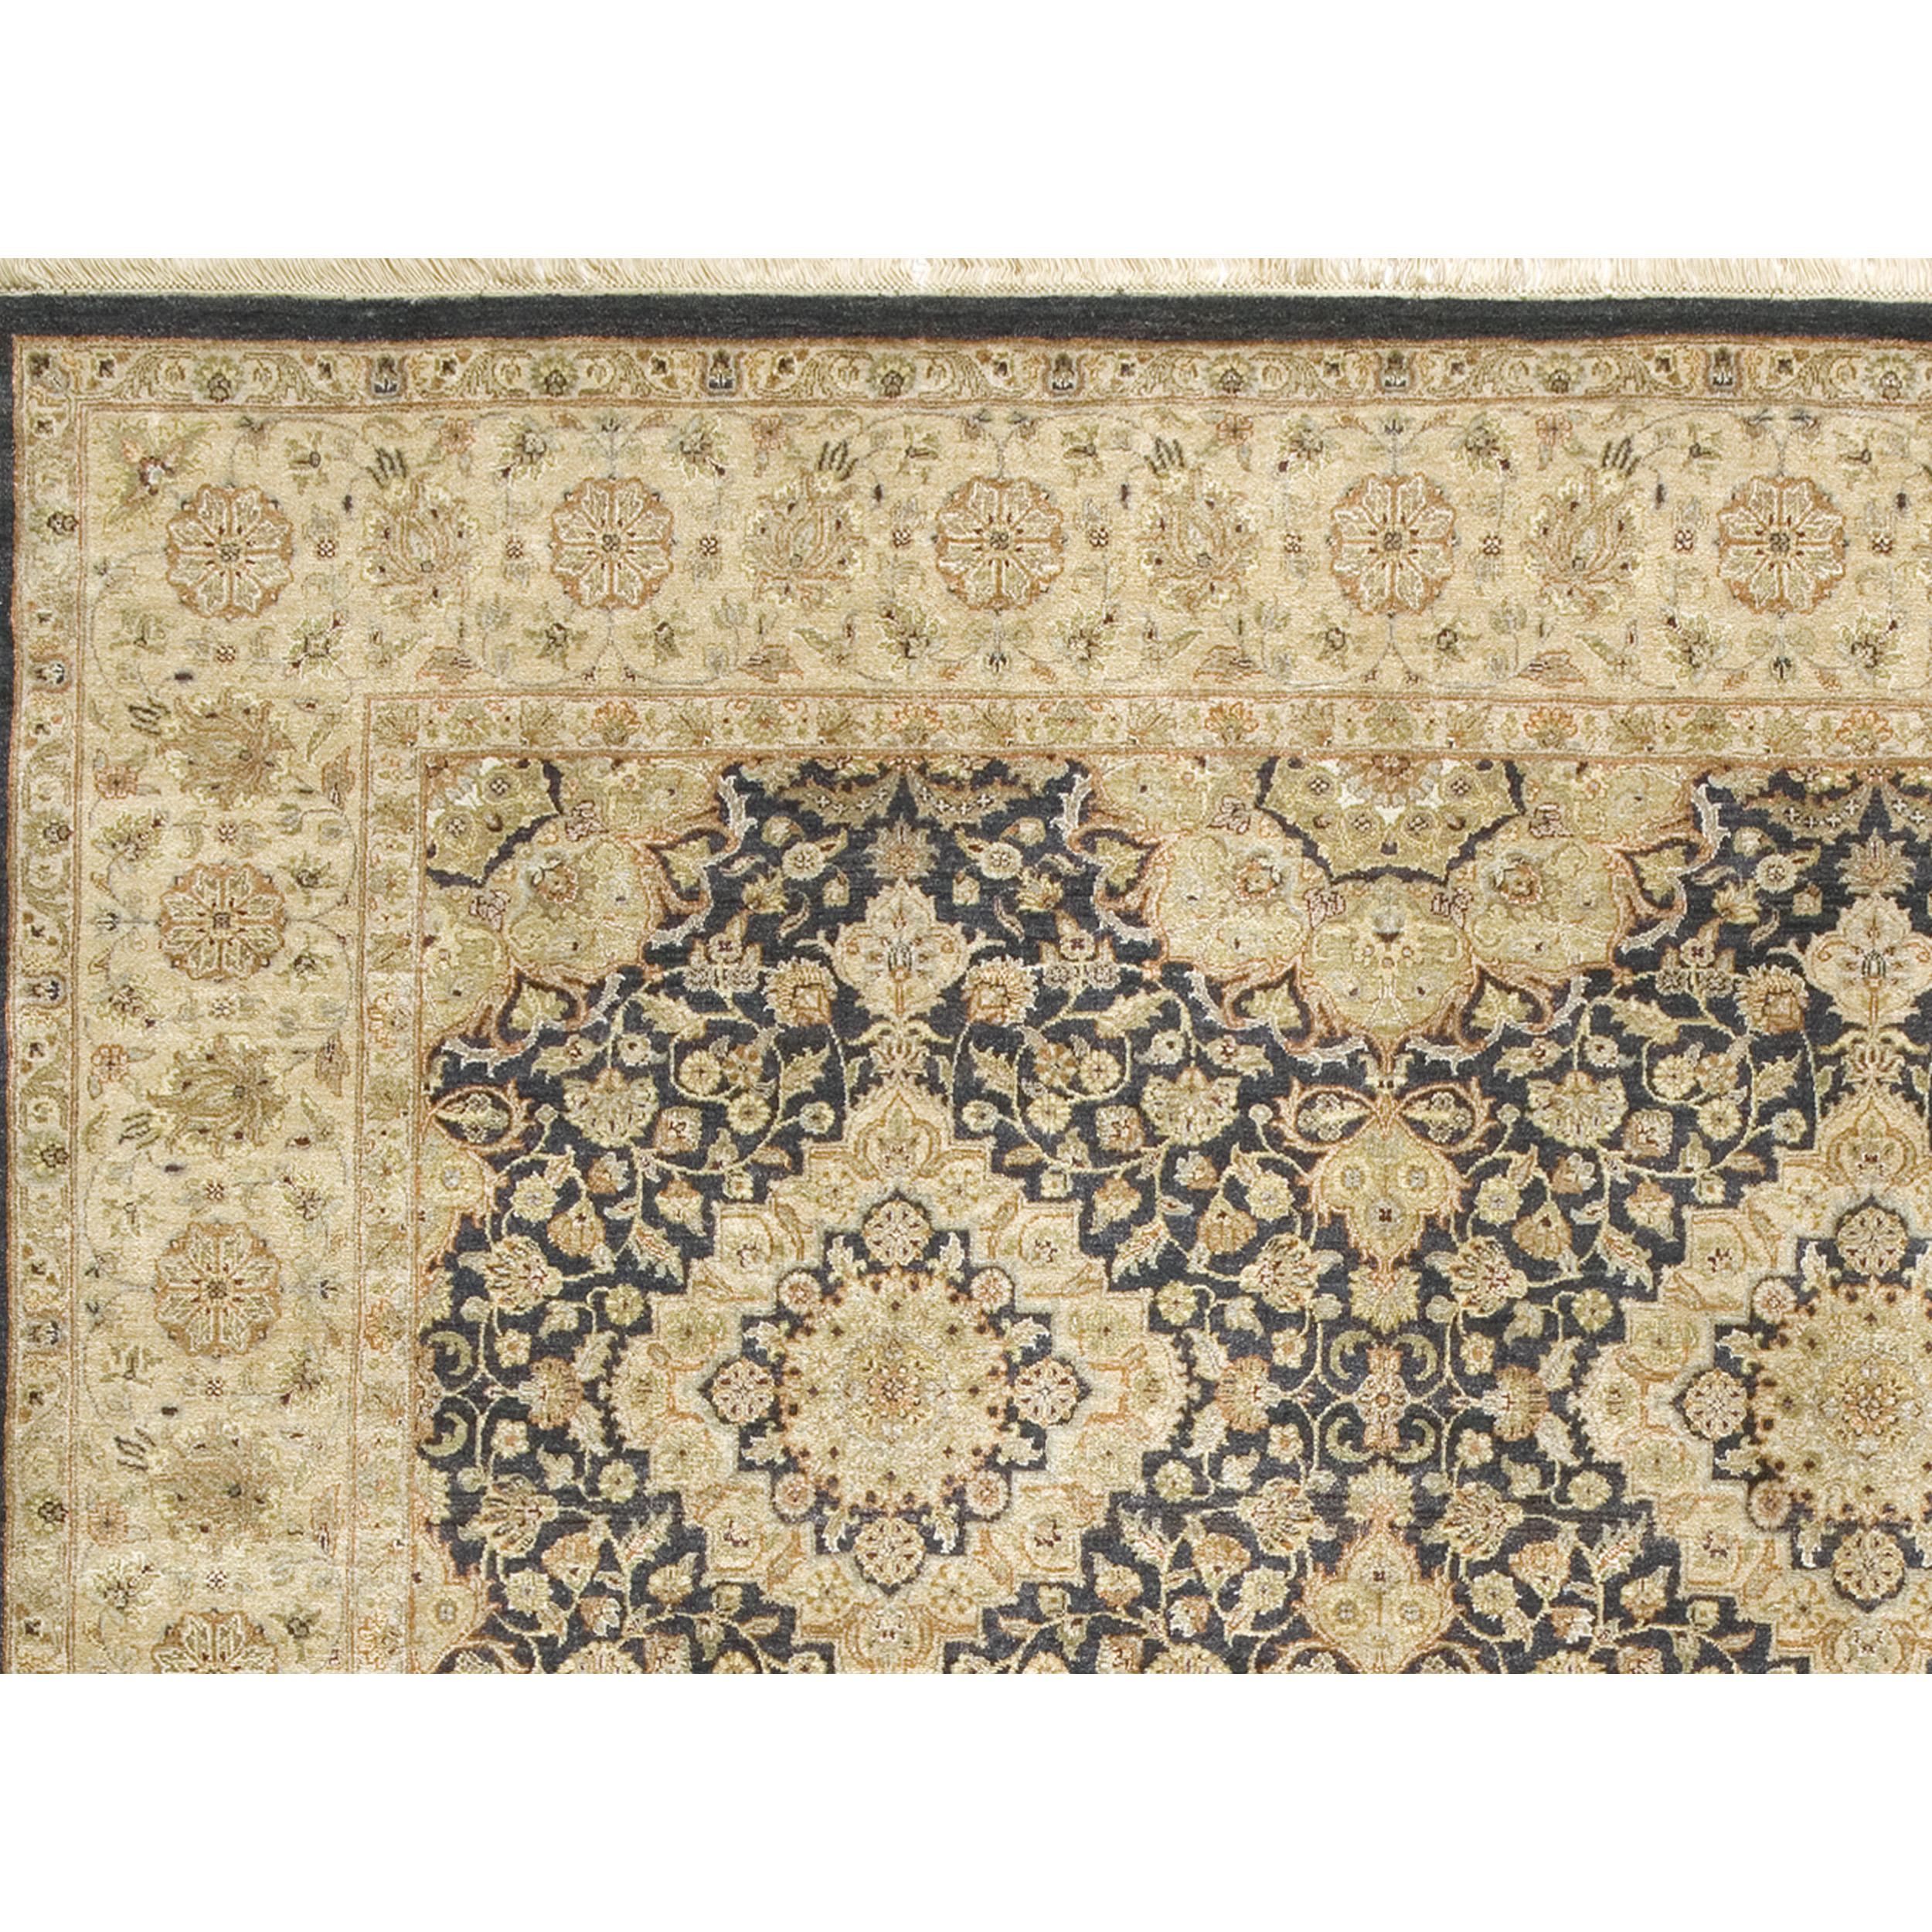 This exquisitely handwoven rug hails from the artistic heritage of India, where skilled weavers have honed their craft to perfection. Meticulously crafted from the most luxurious silks, this rug is a result of unparalleled delicacy and refinement.